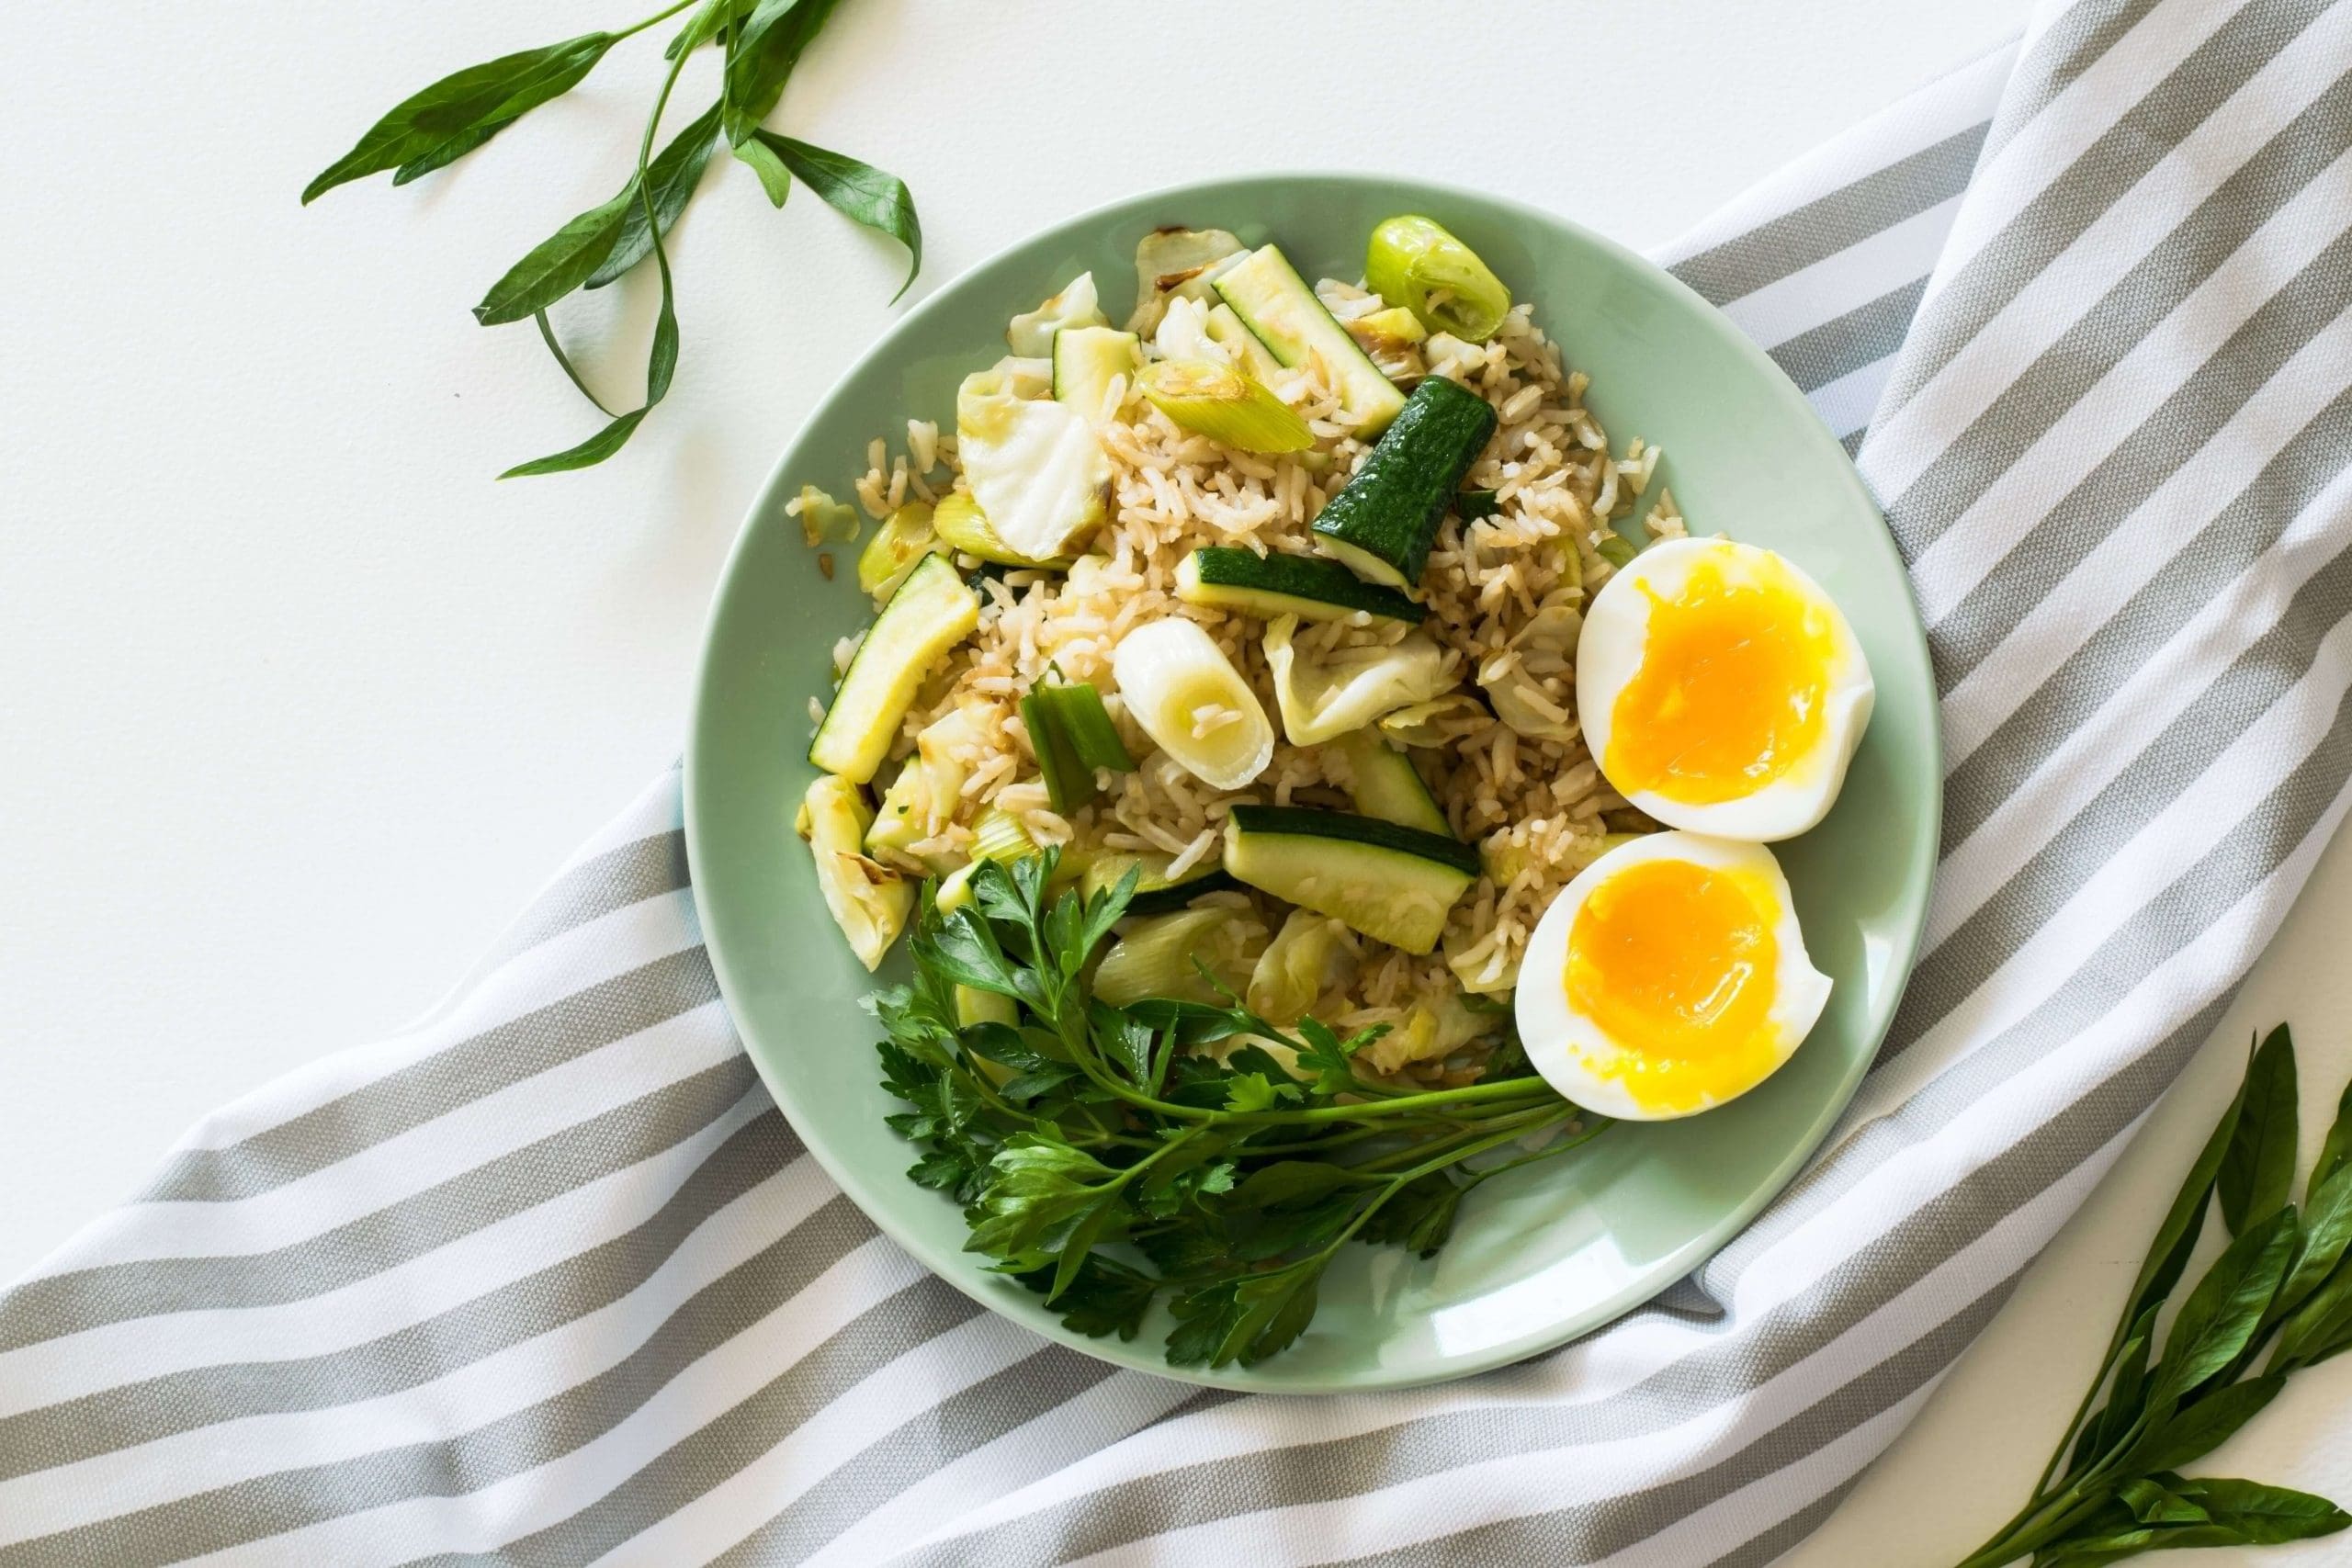 Meal of fried rice, egg and greens